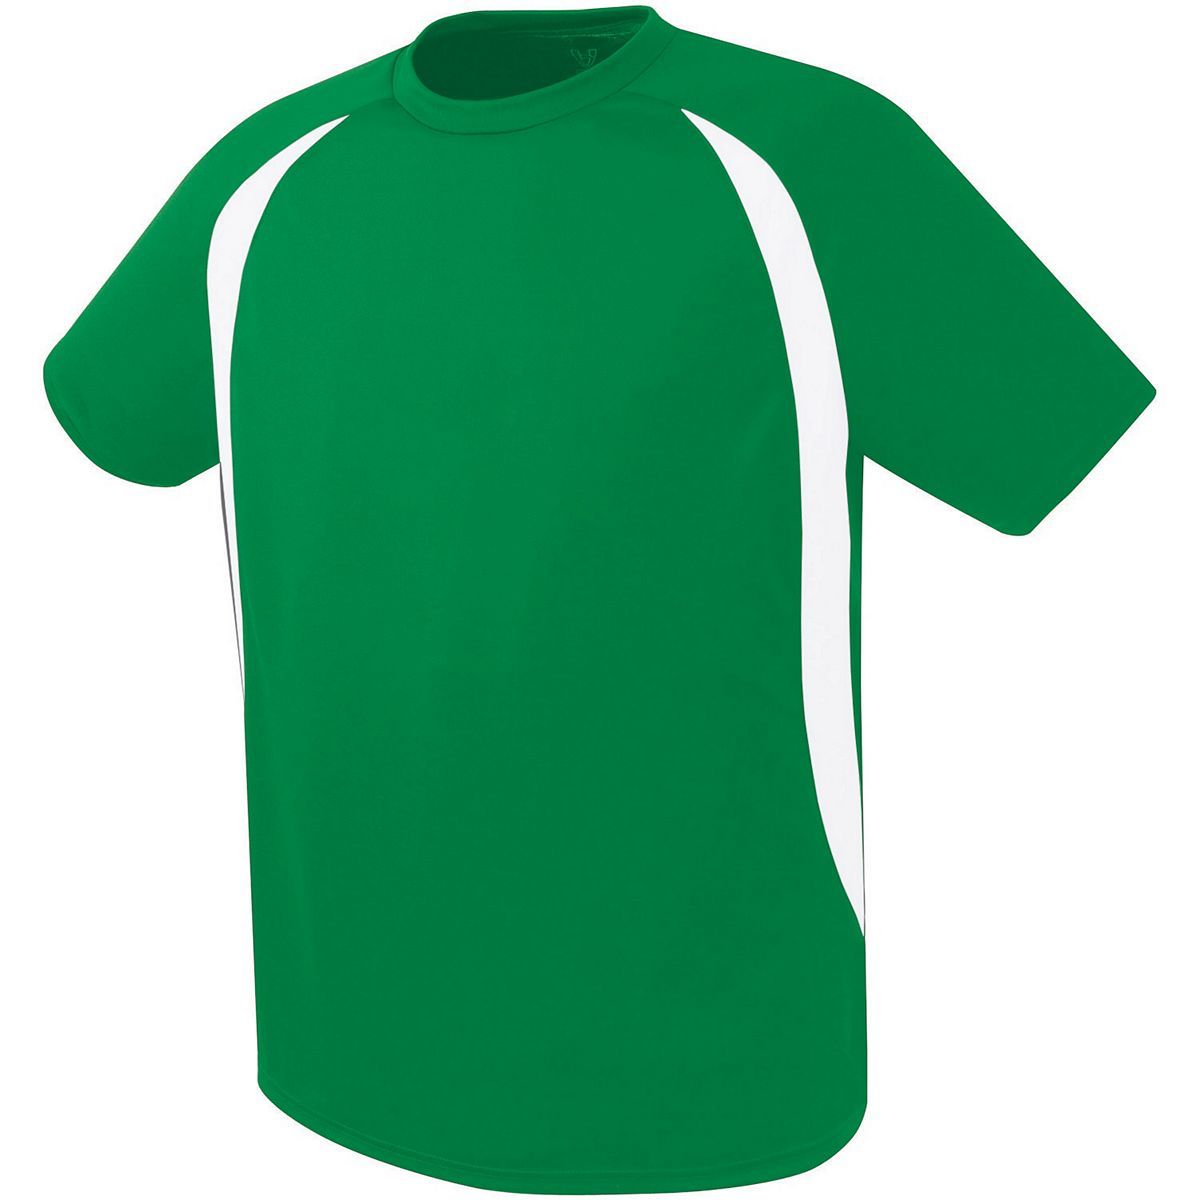 High 5 Liberty  Soccer Jersey in Kelly/White  -Part of the Adult, Adult-Jersey, High5-Products, Soccer, Shirts, All-Sports-1 product lines at KanaleyCreations.com